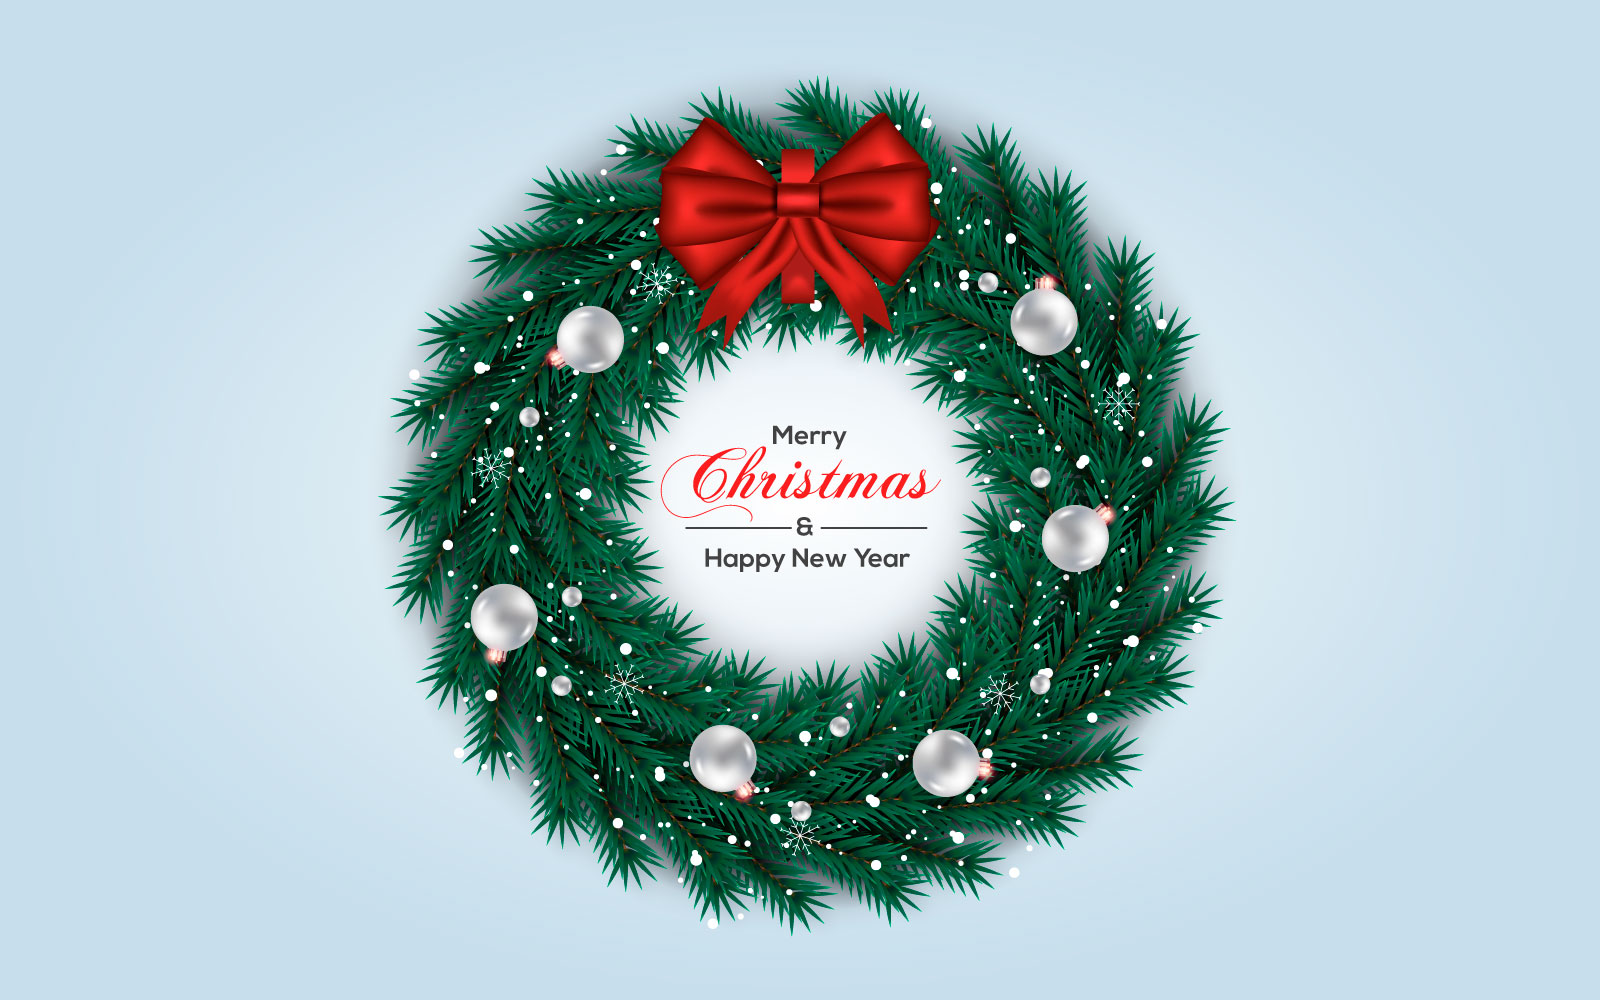 Christmas wreath vector concept design. merry christmas text in grass wreath element with color ball